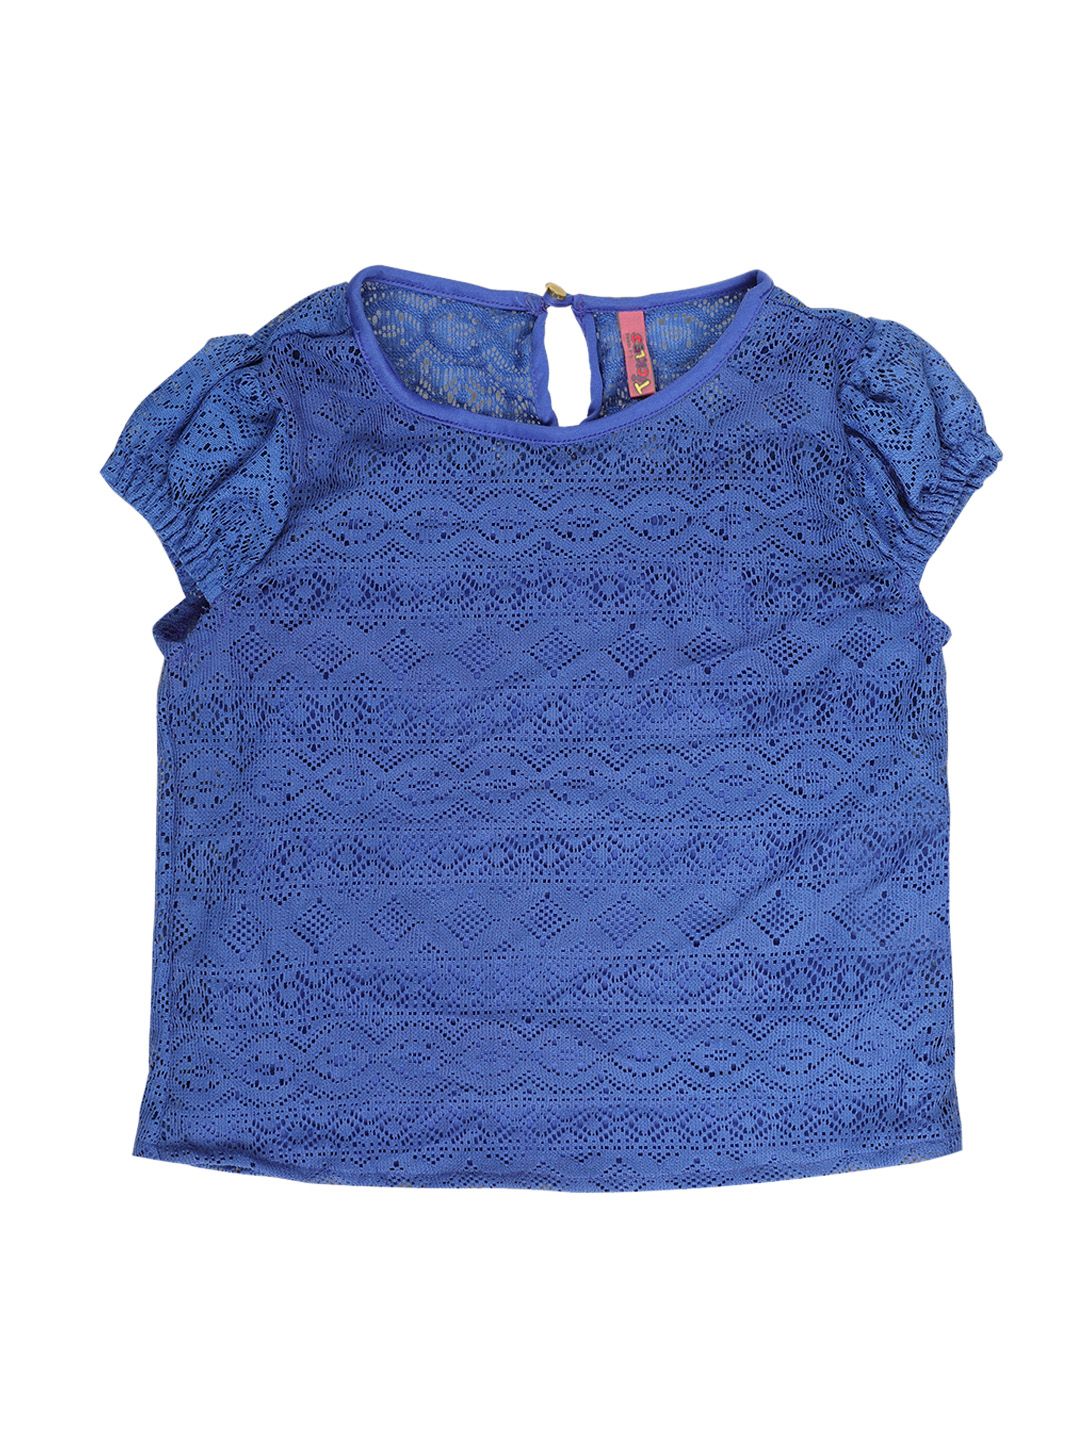 Tickles Blue Casual Top for girls price 2018 & trends in India | PriceHunt